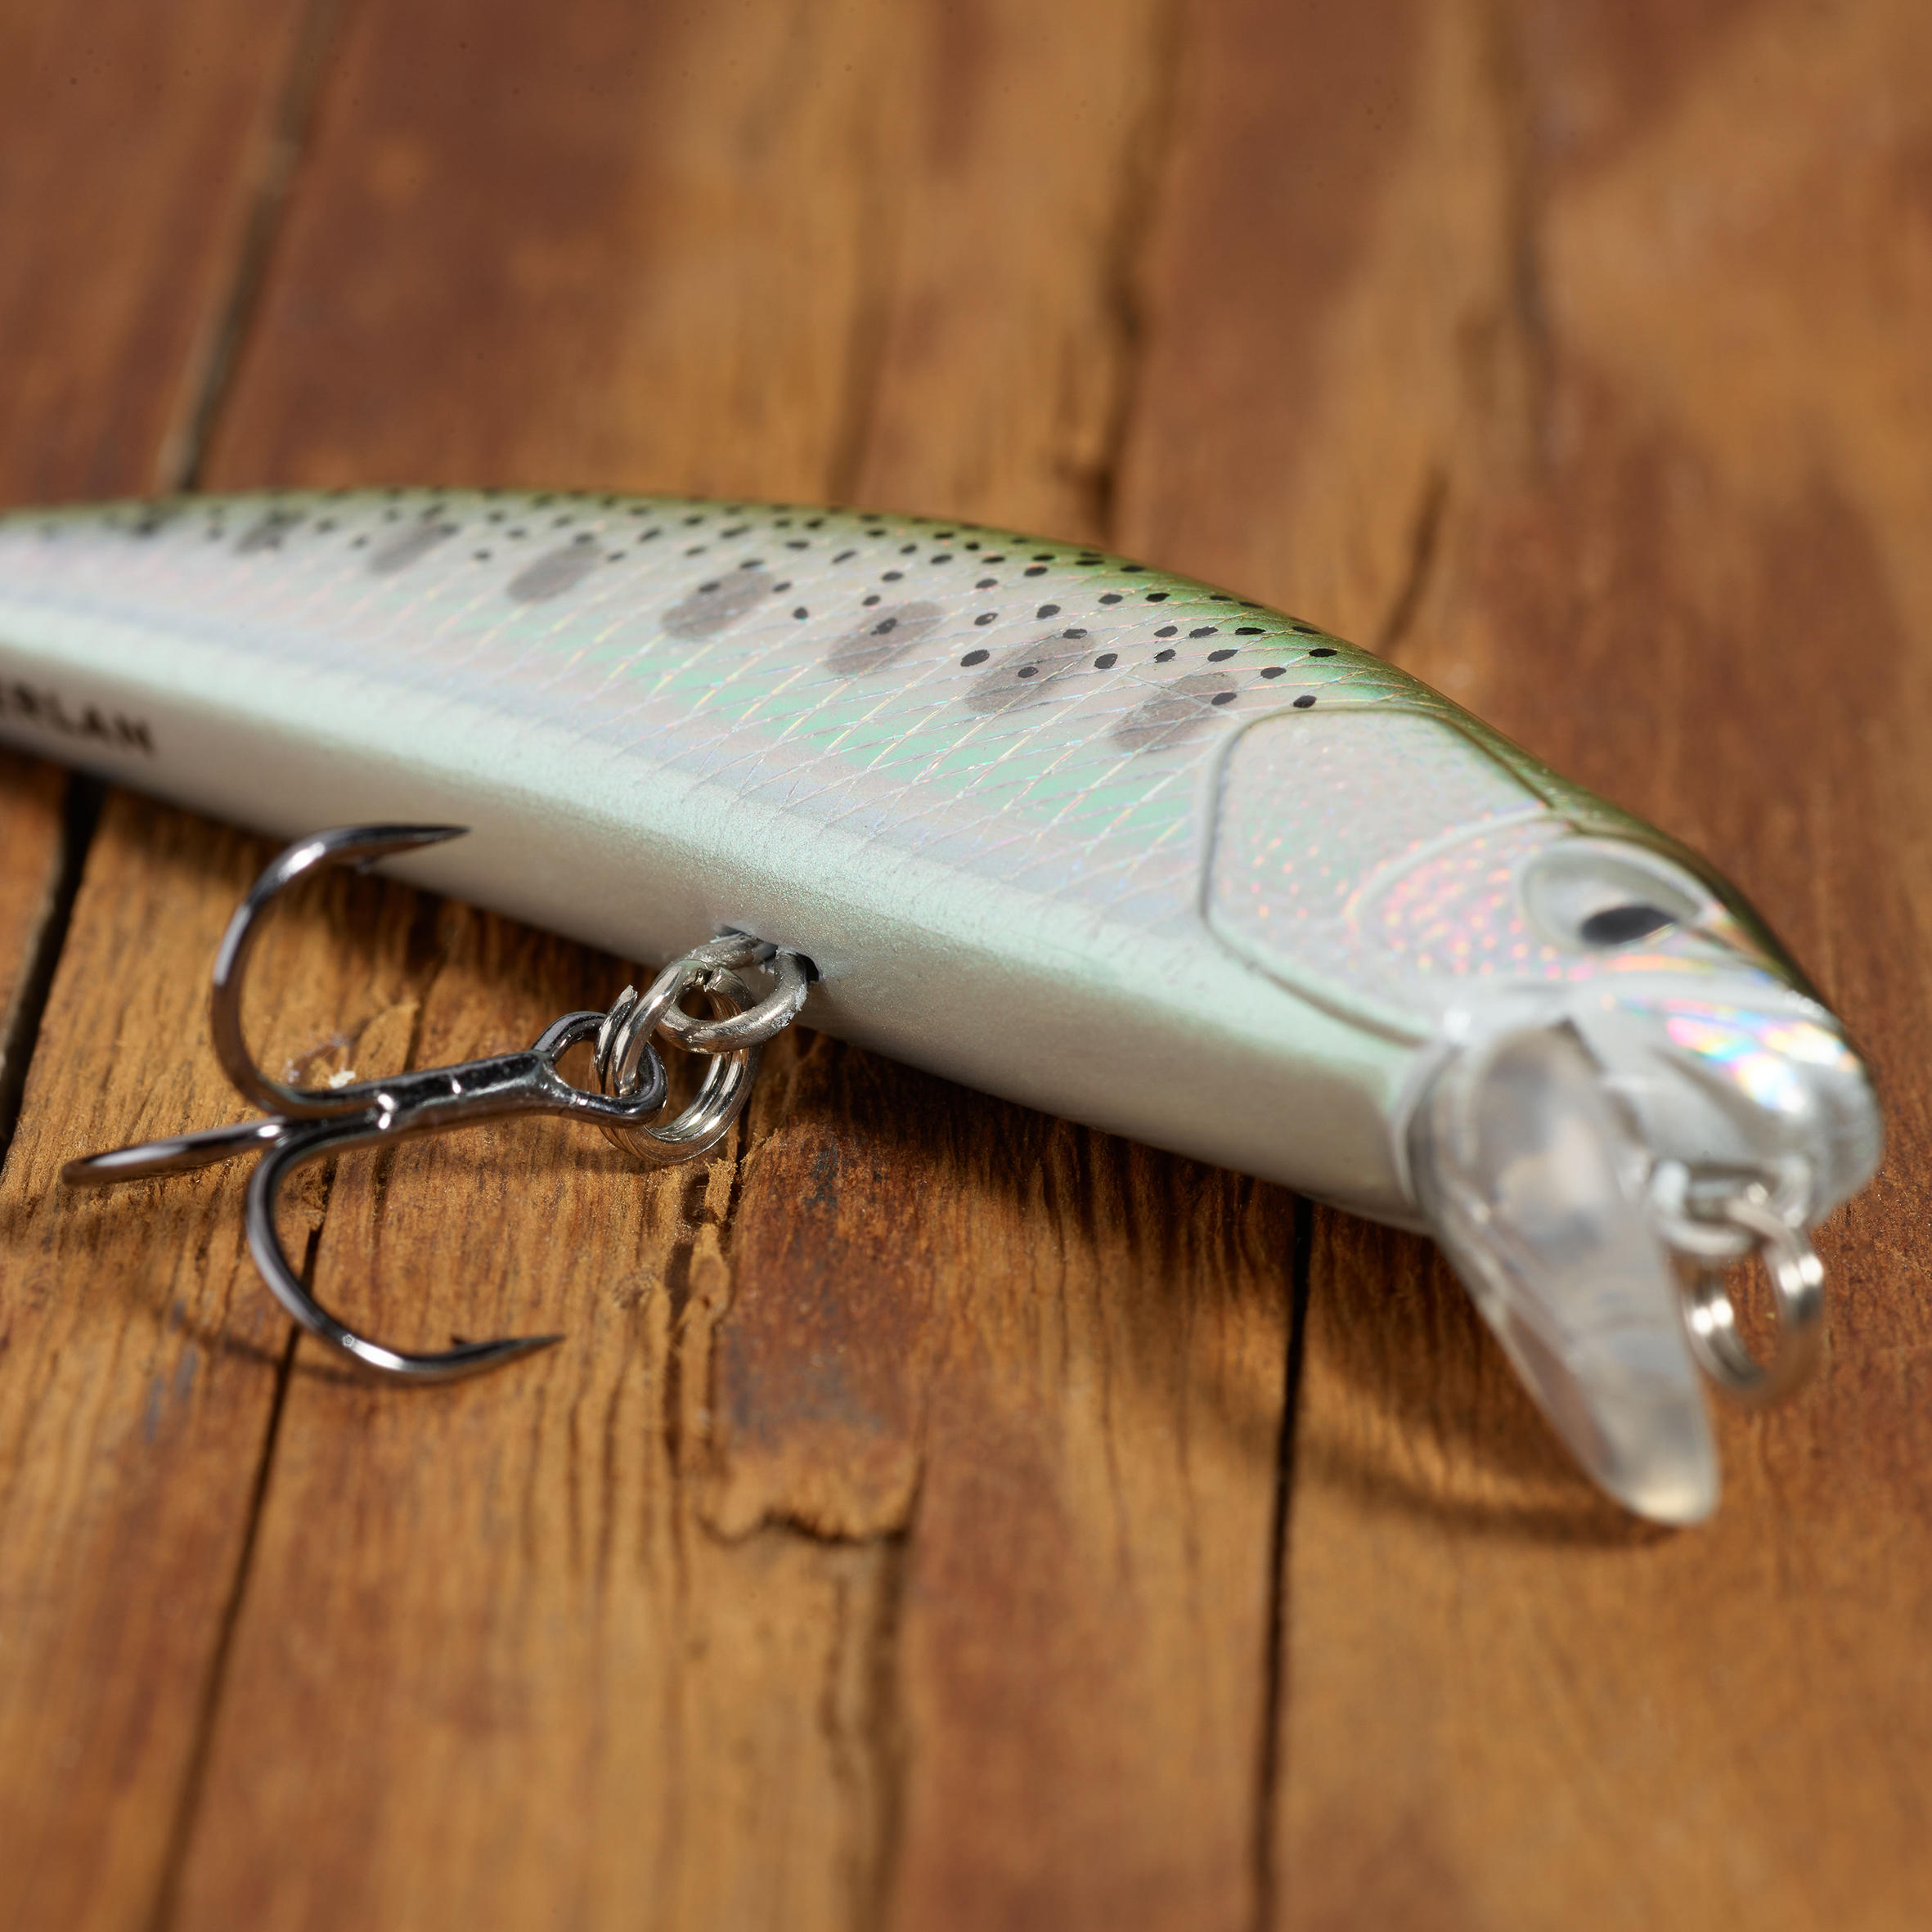 MINNOW HARD LURE FOR TROUT WXM  MNWFS US 65 YAMAME 3/4